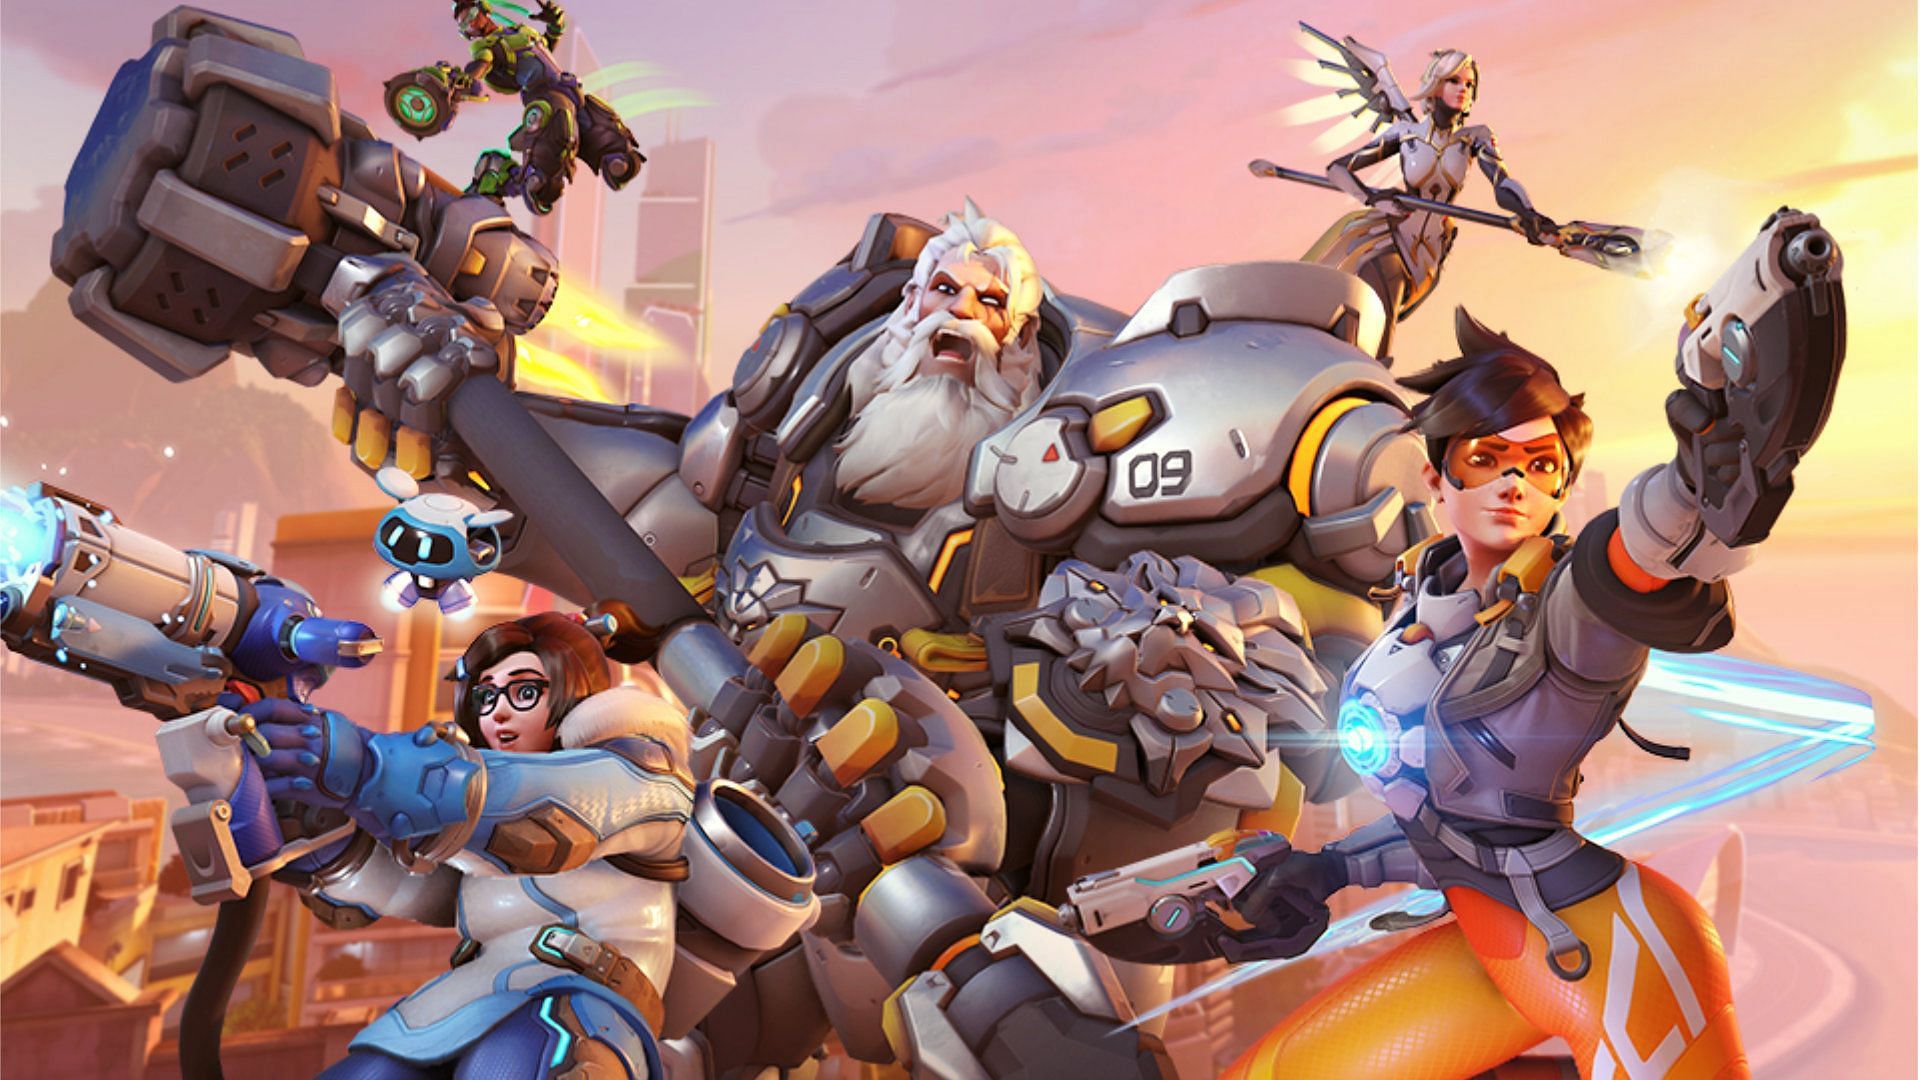 The end of Overwatch (Image vis Blizzard)